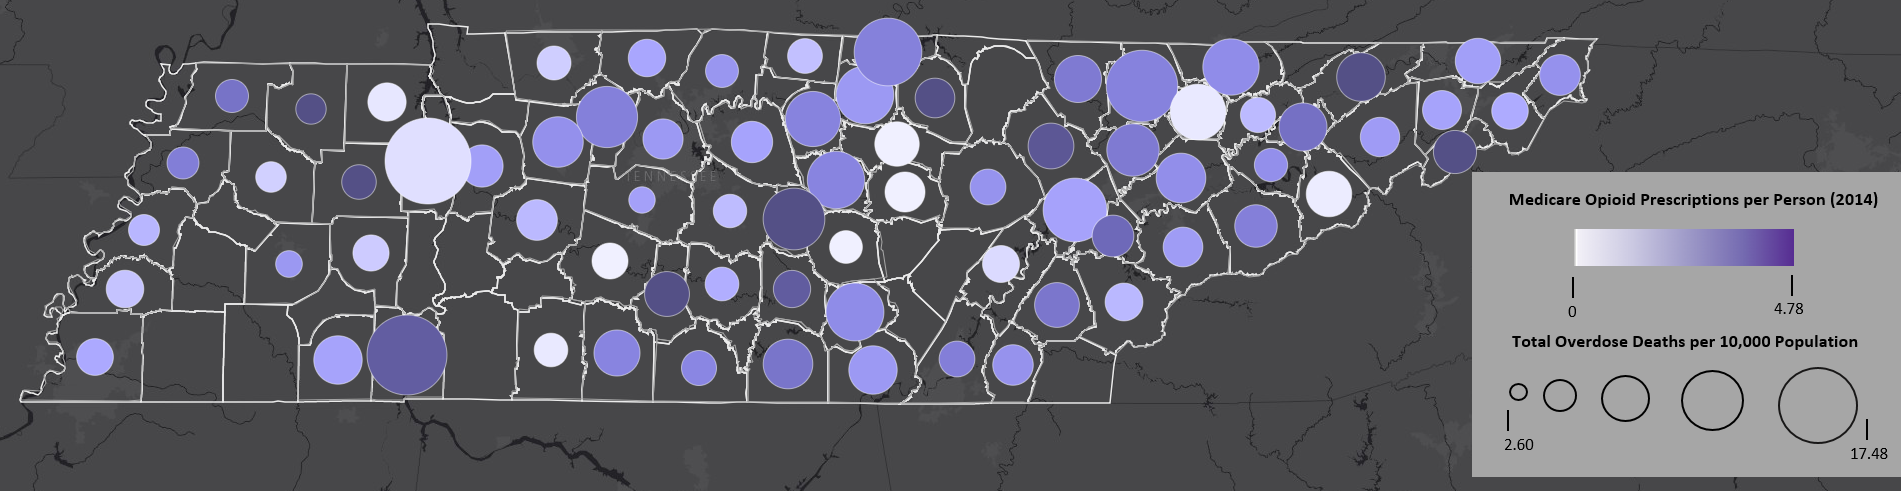 Graphic: Tennessee Opioid Prescriptions and Deaths